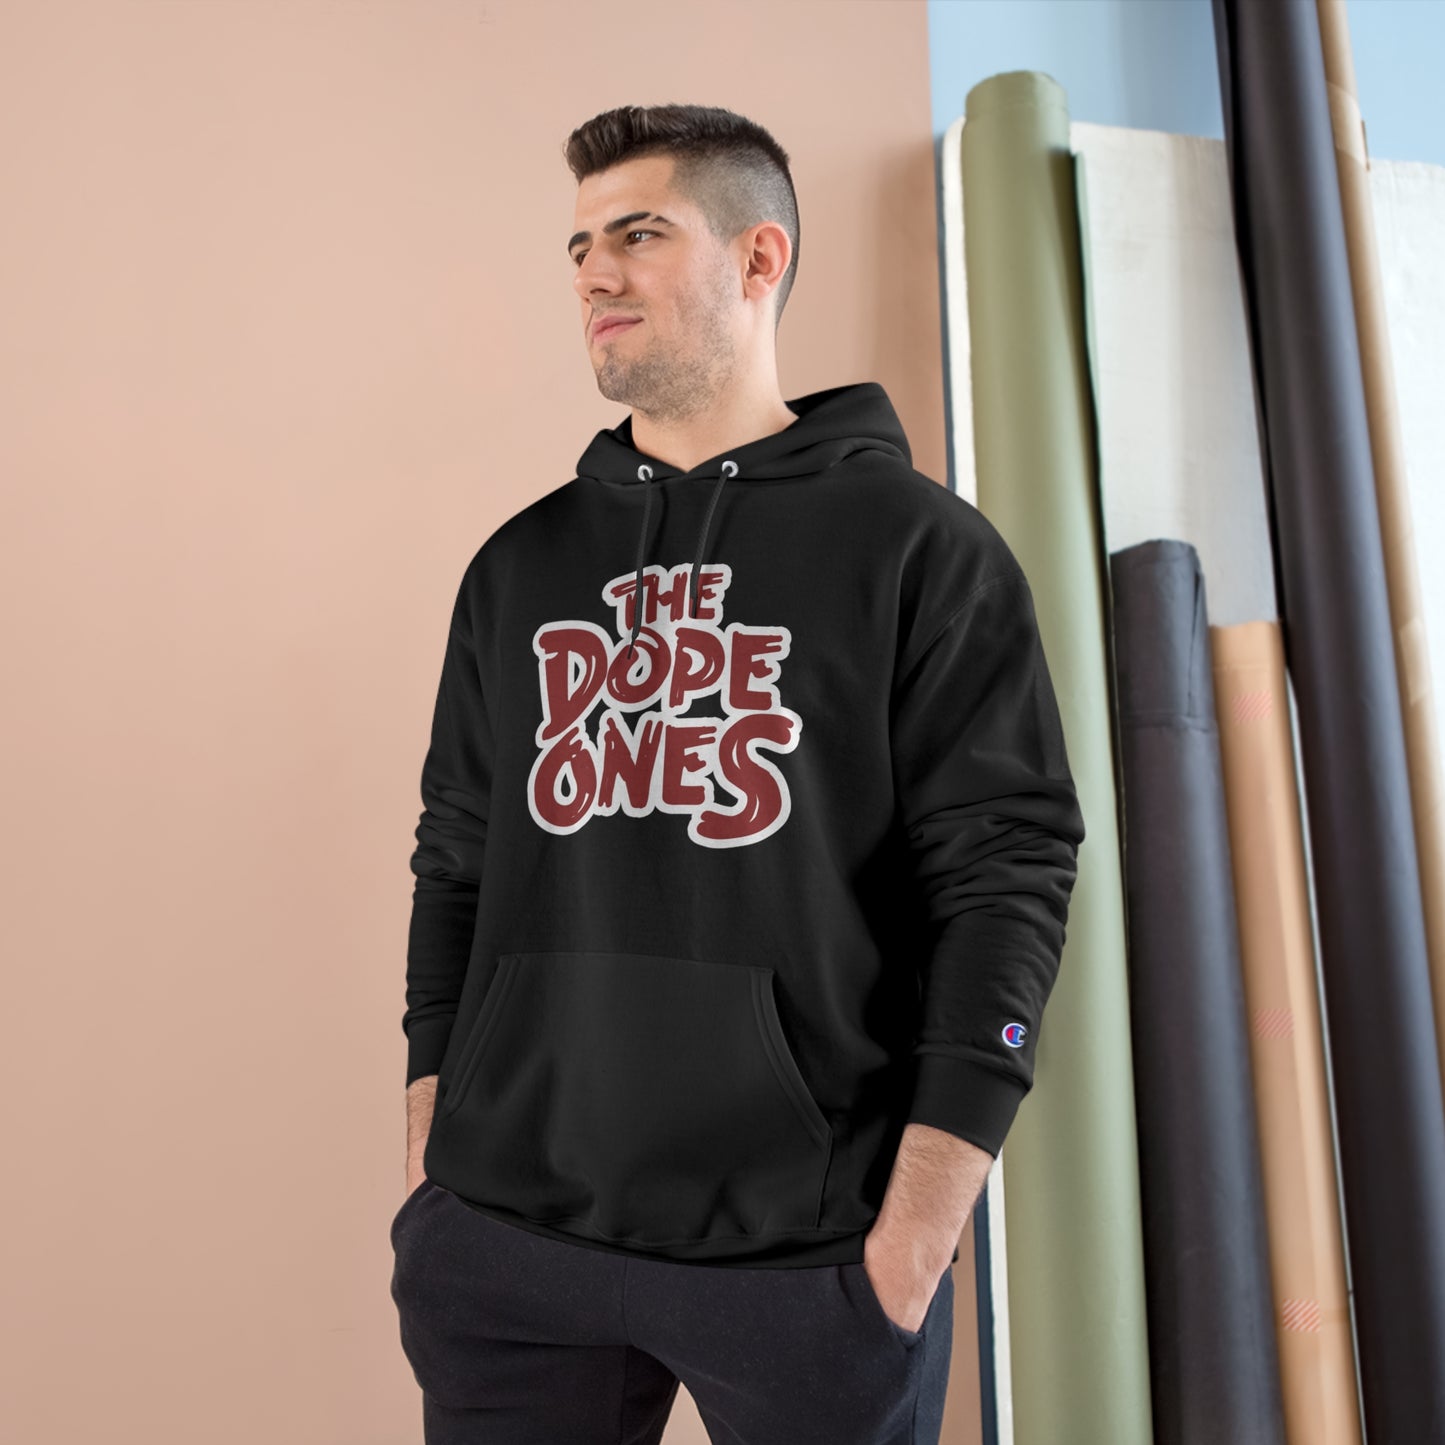 theDopeOnes ADW Hoodie